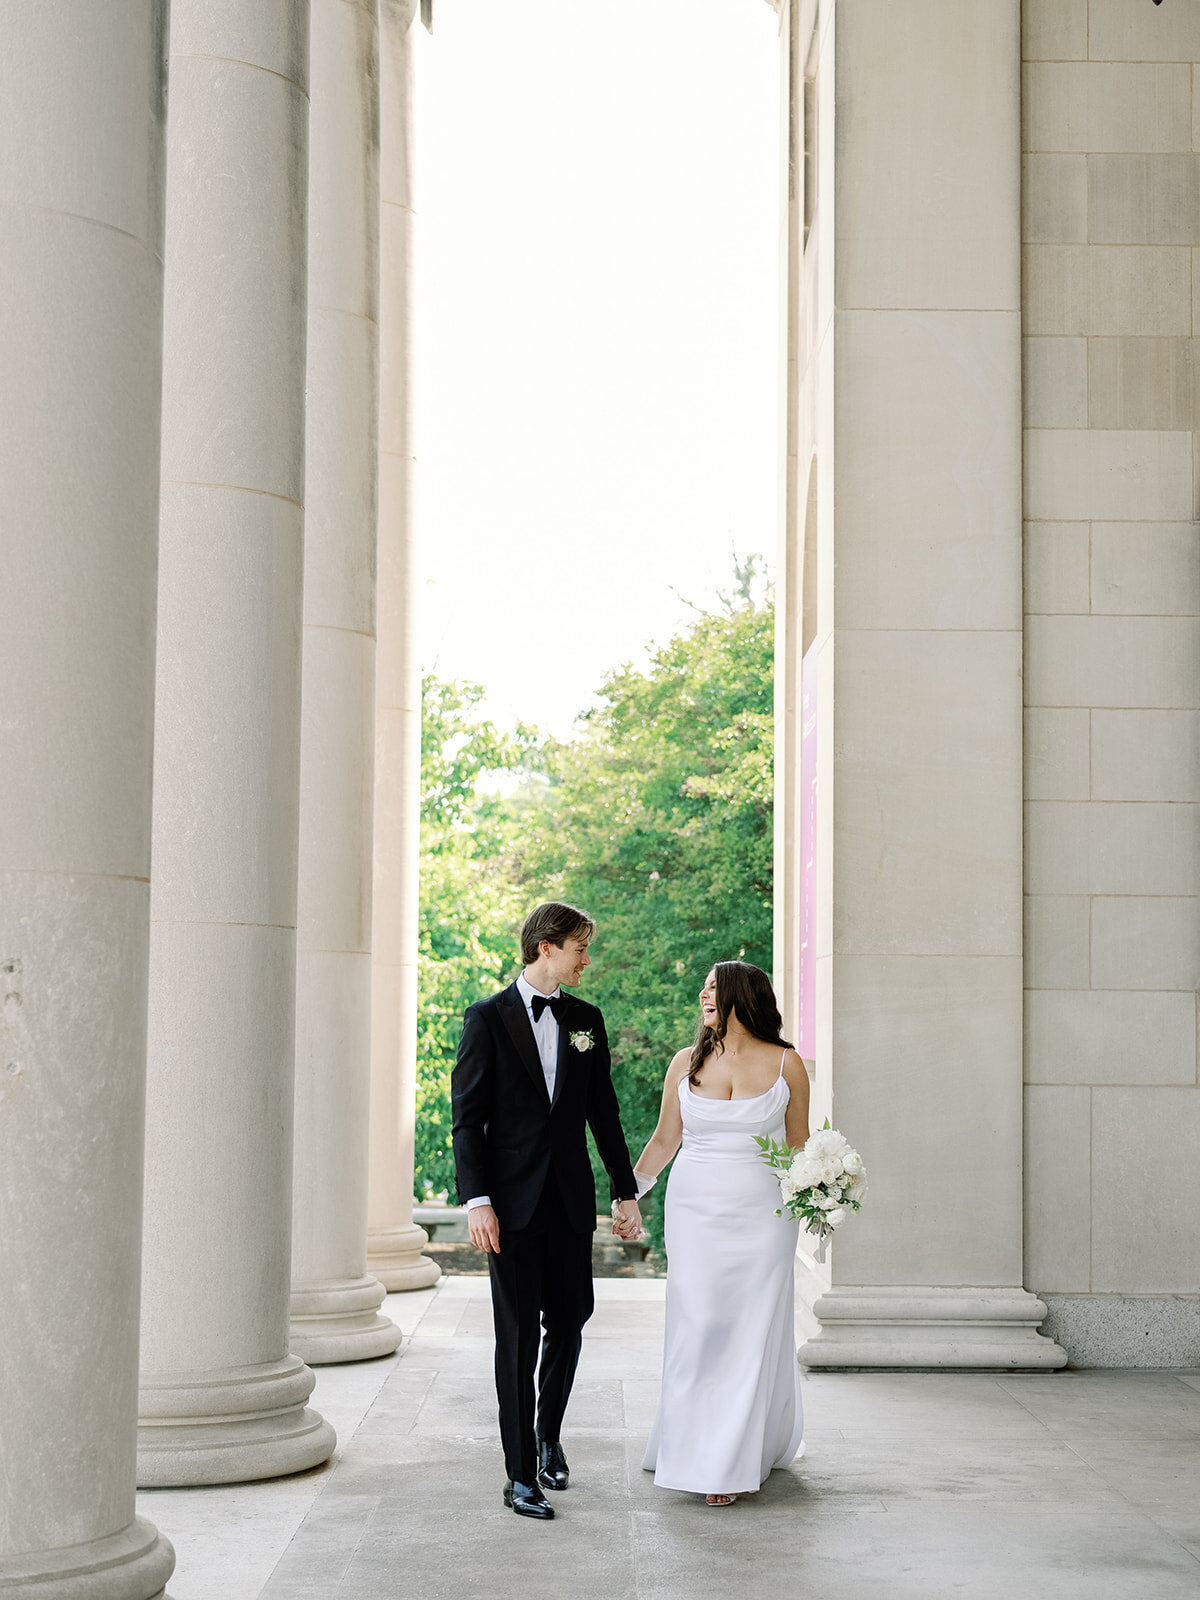 111_Kate Campbell Floral BMA Baltimore Museum of Art Wedding Portraits by Nikki Daskalakis photo